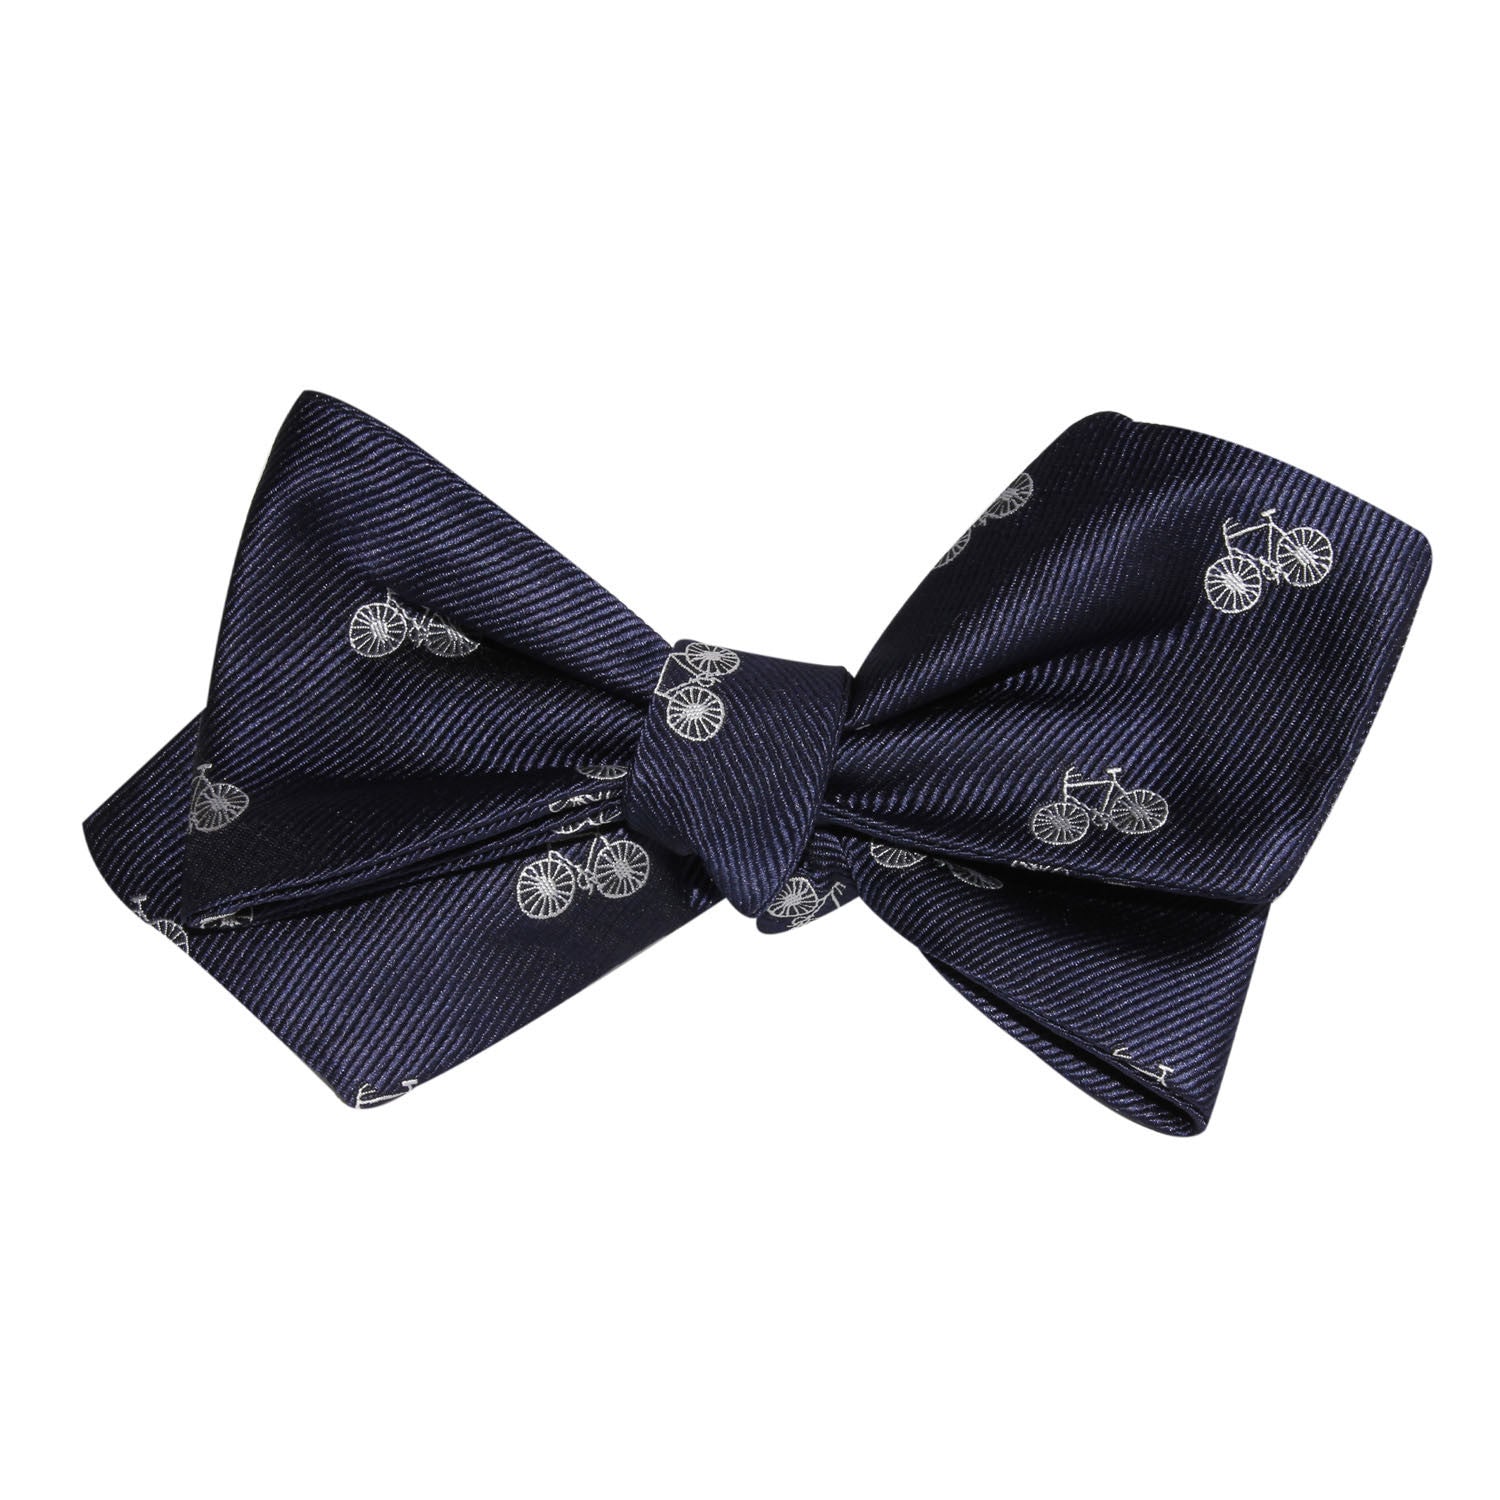 Navy Blue French Bicycle Self Tie Diamond Tip Bow Tie 3